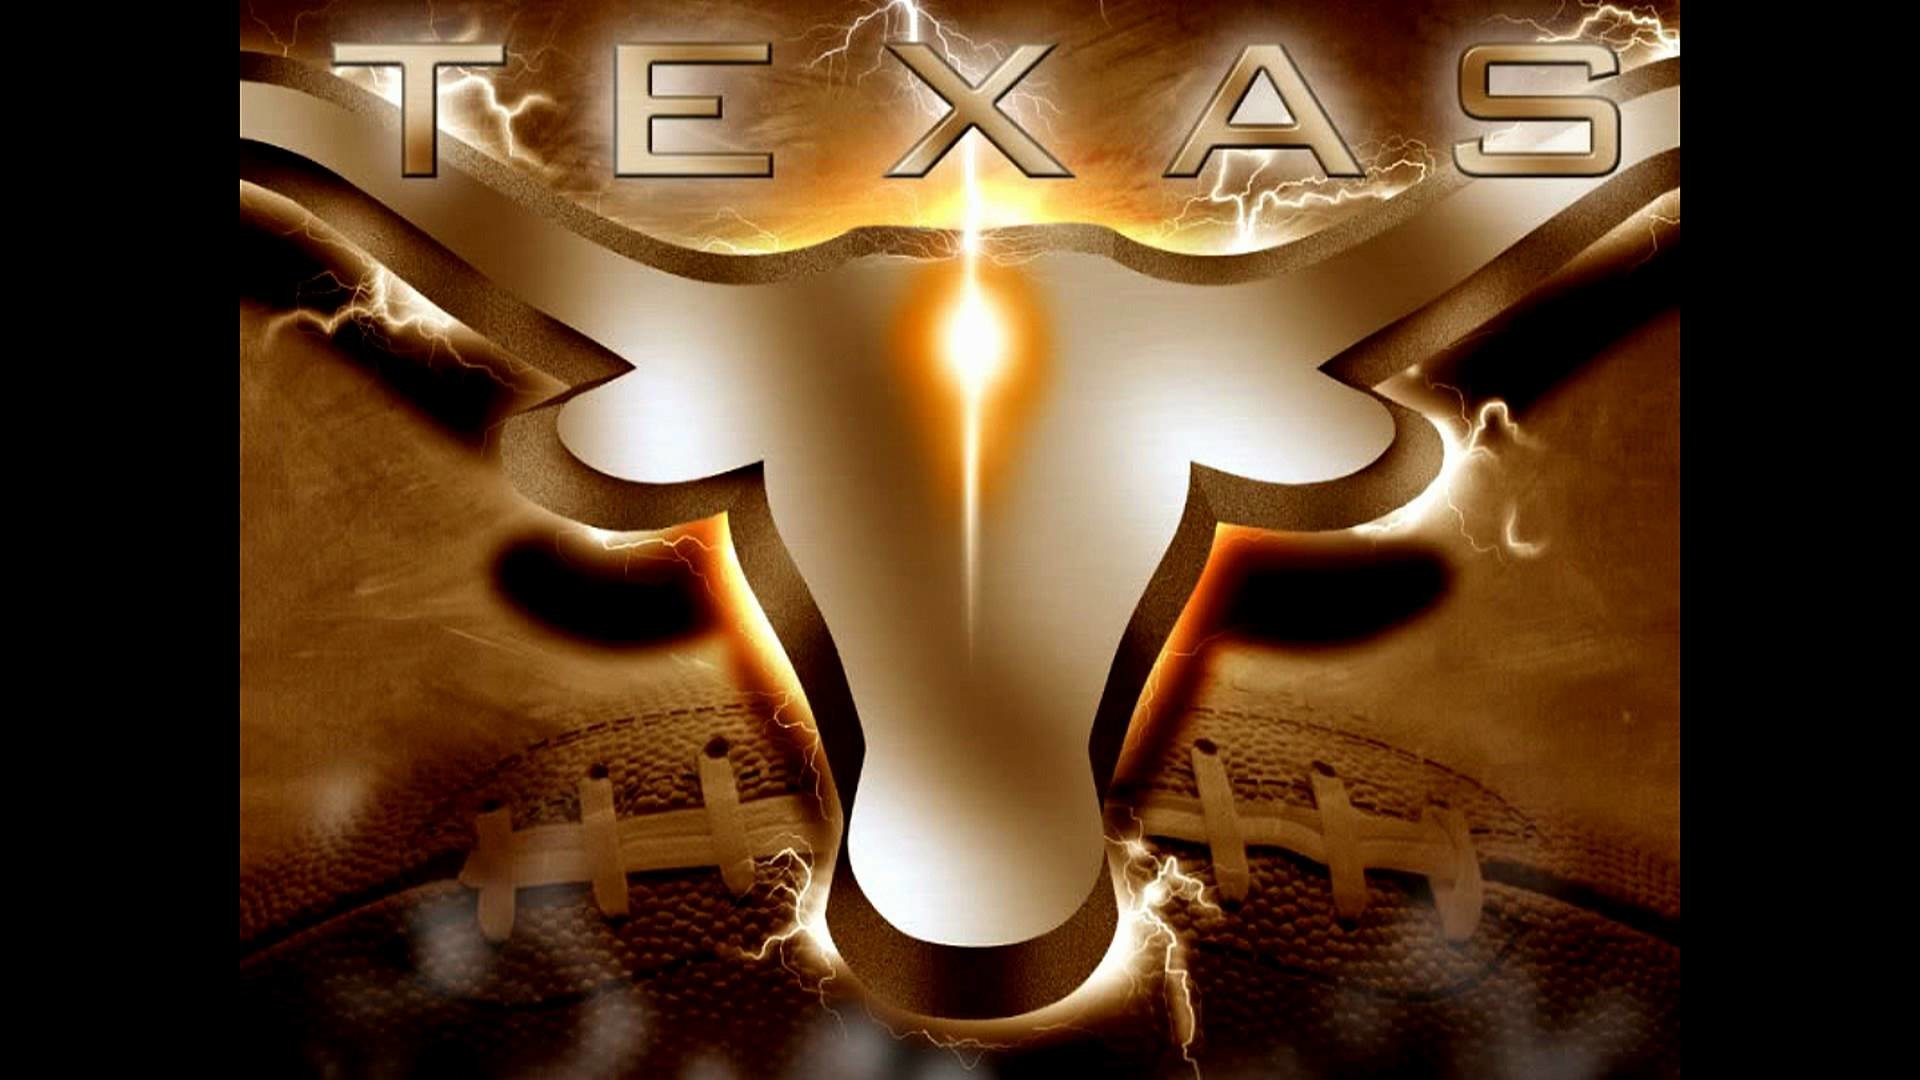 1920x1080 TEXAS LONGHORNS FIGHT SONG REMIX!!! - YouTube